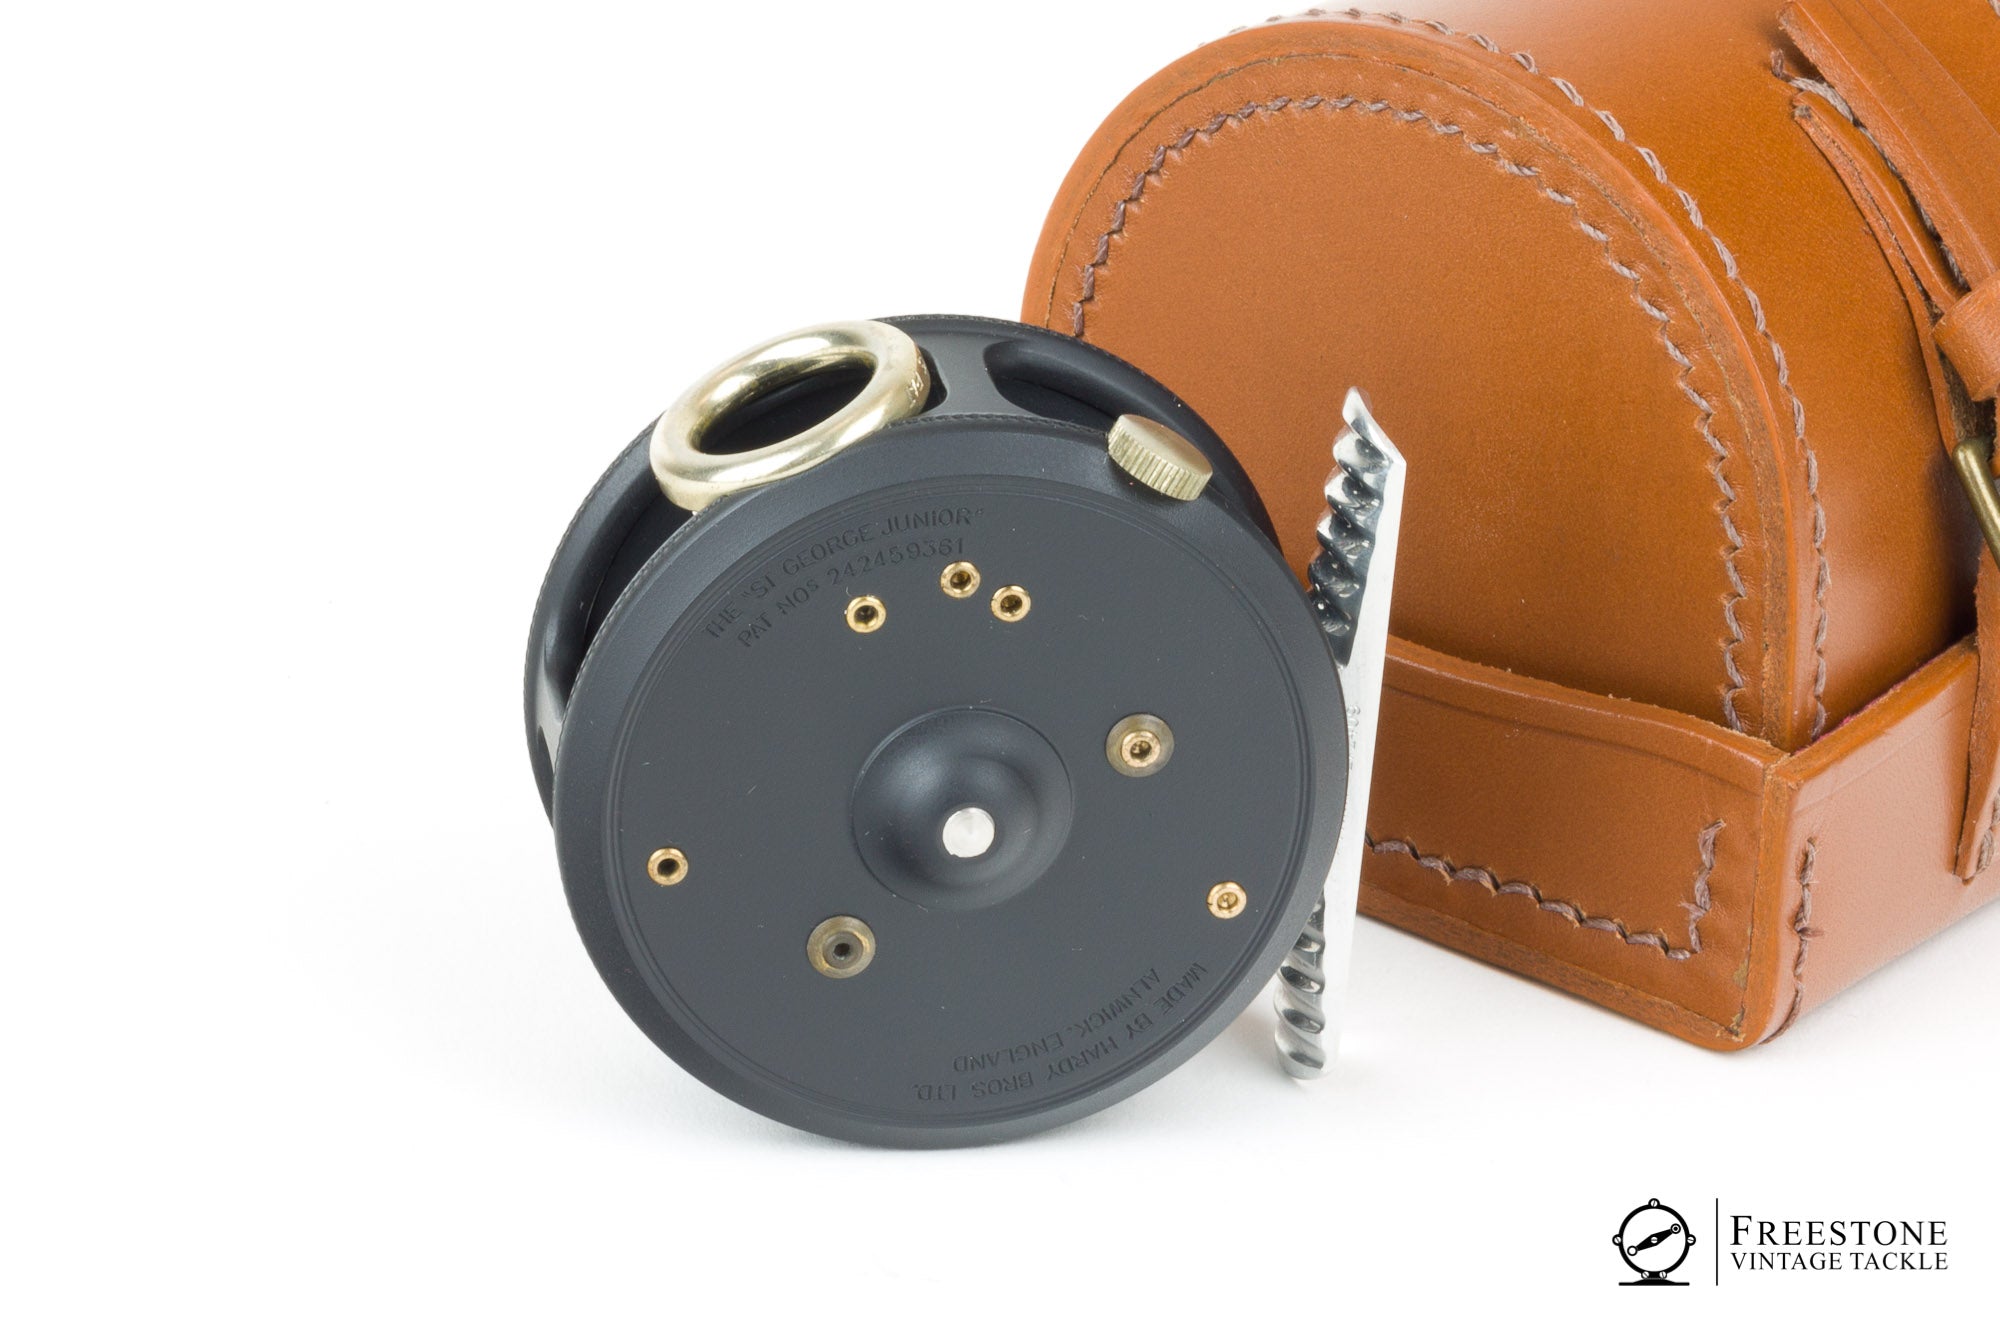 Hardy St George Fly Fishing Reel Product Details